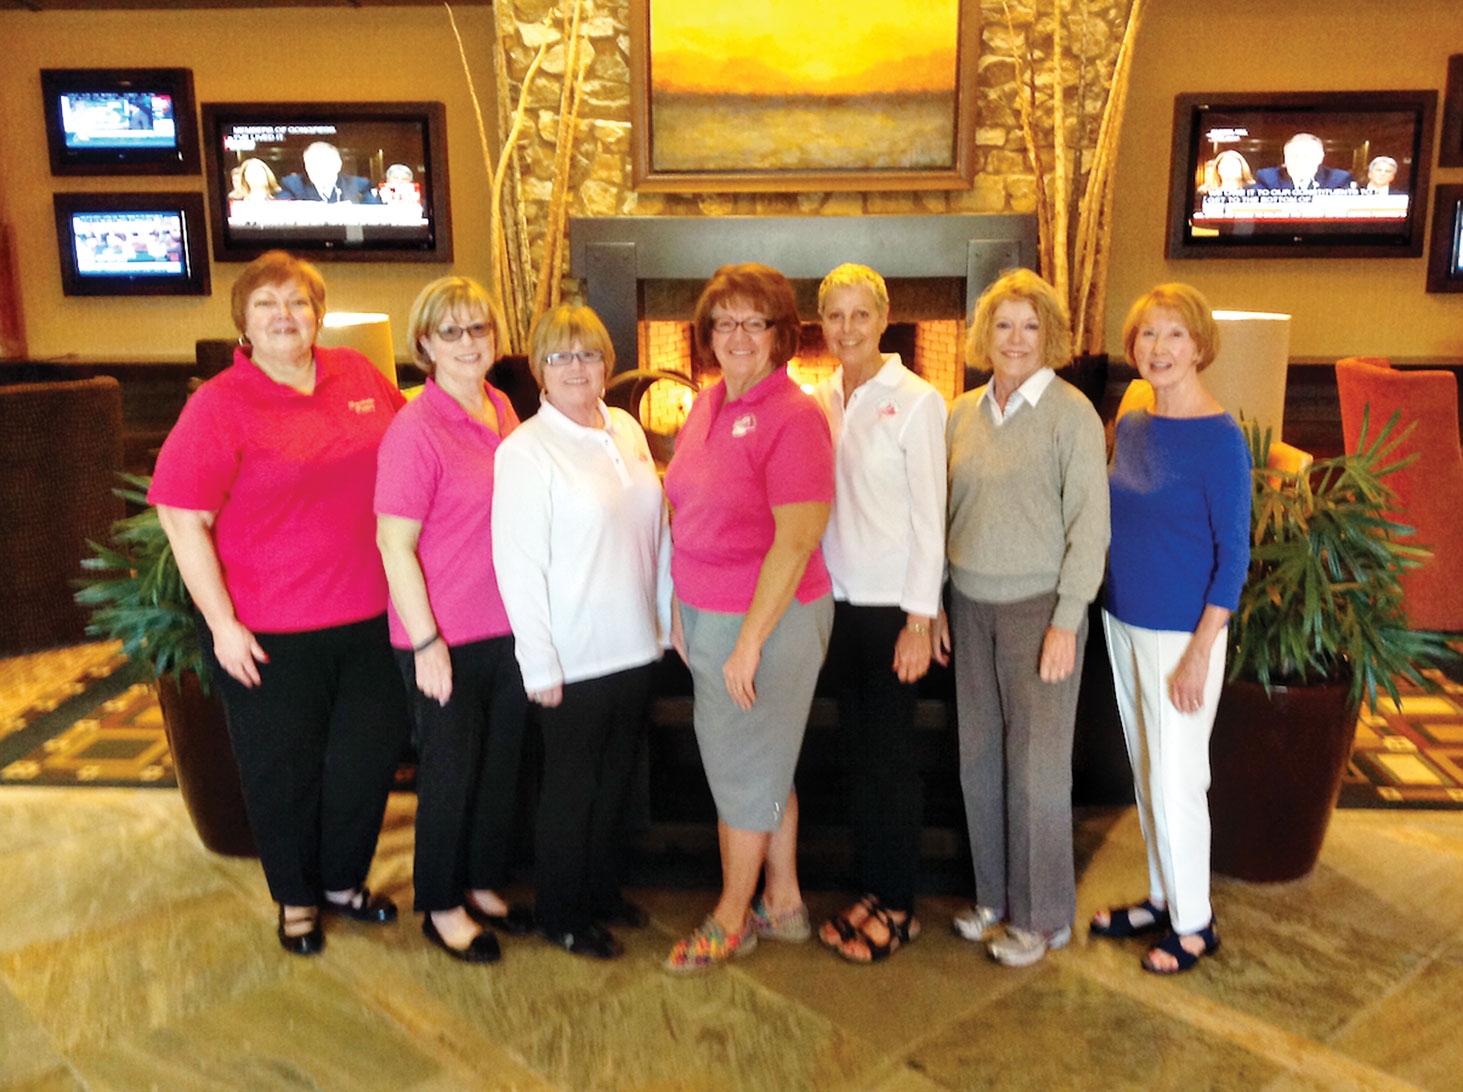 The 2017 Ranchette Putters Board Members, from left: Mary Schlachter, treasurer; Jeannie Bianchini, statistician; Marian Bianchini, membership coordinator; Nancy Galant, president; Cindy Heck, event coordinator; Vicki Godbey, vice president and Terry Barringer, secretary. Photo by Deb Lawson